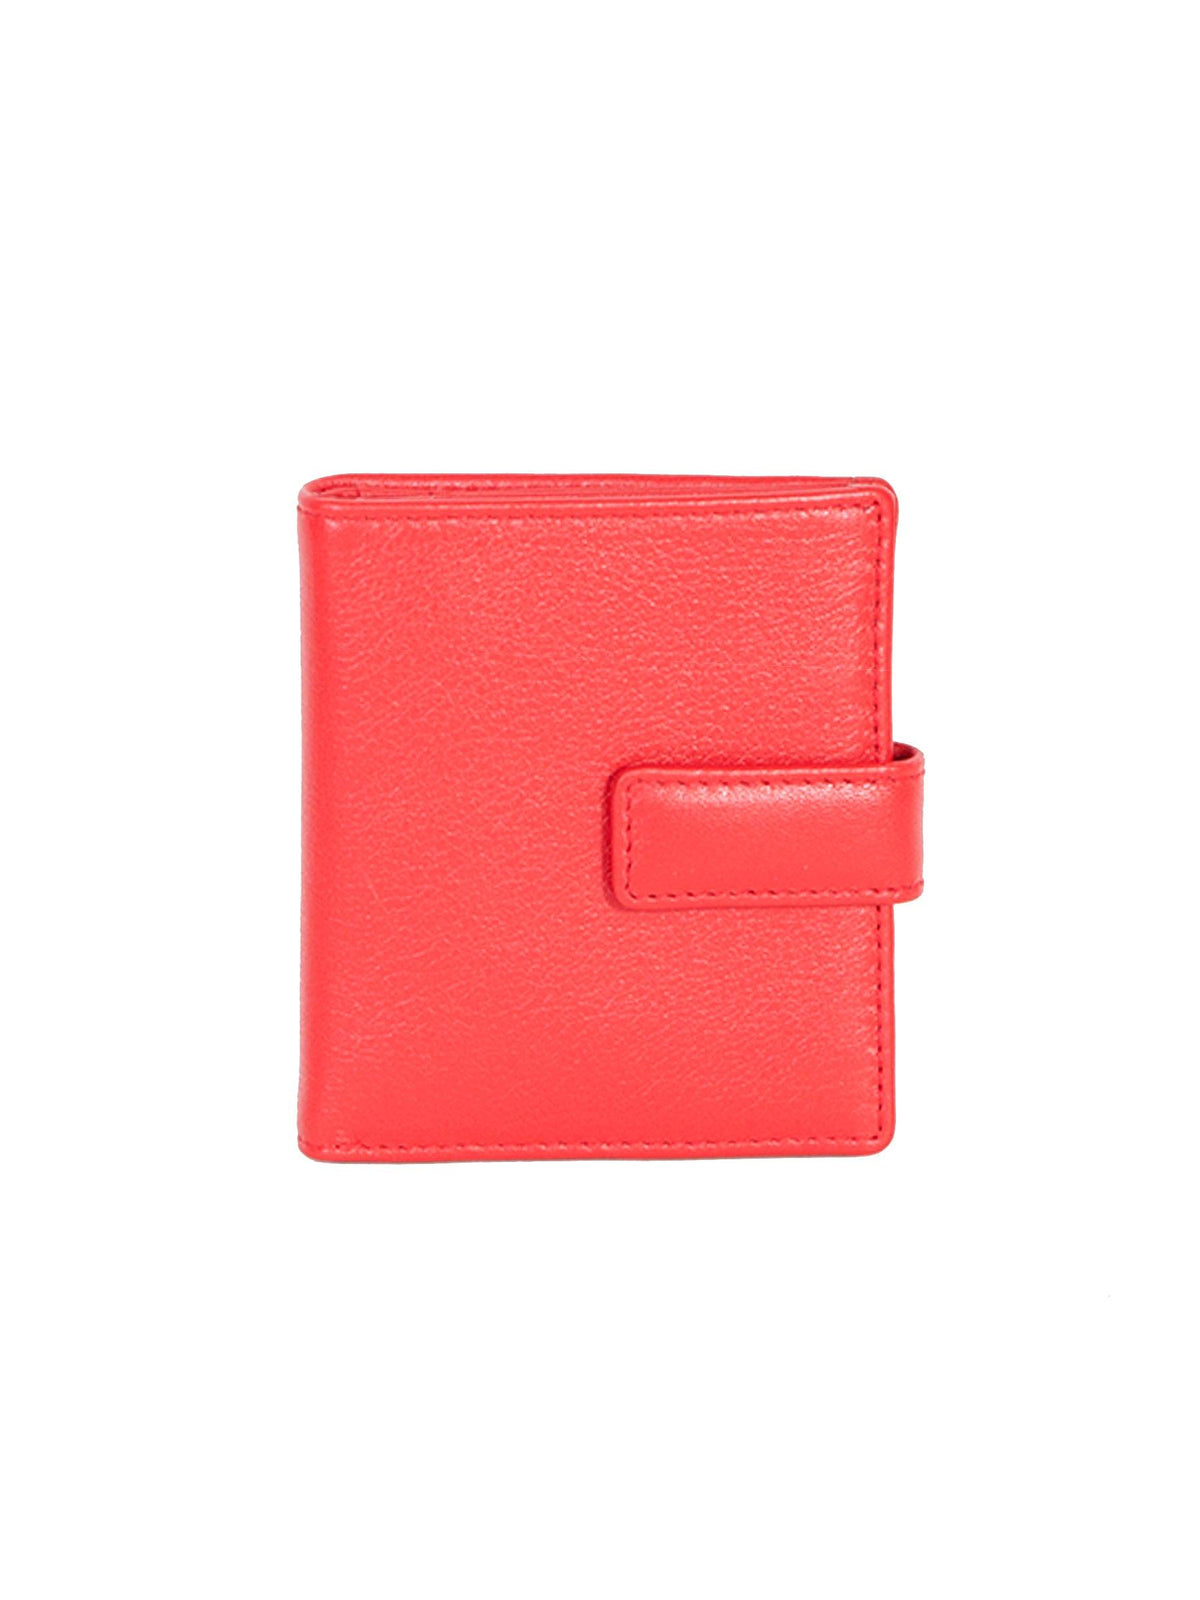 Scully RED TAB MINI WALLET - Flyclothing LLC